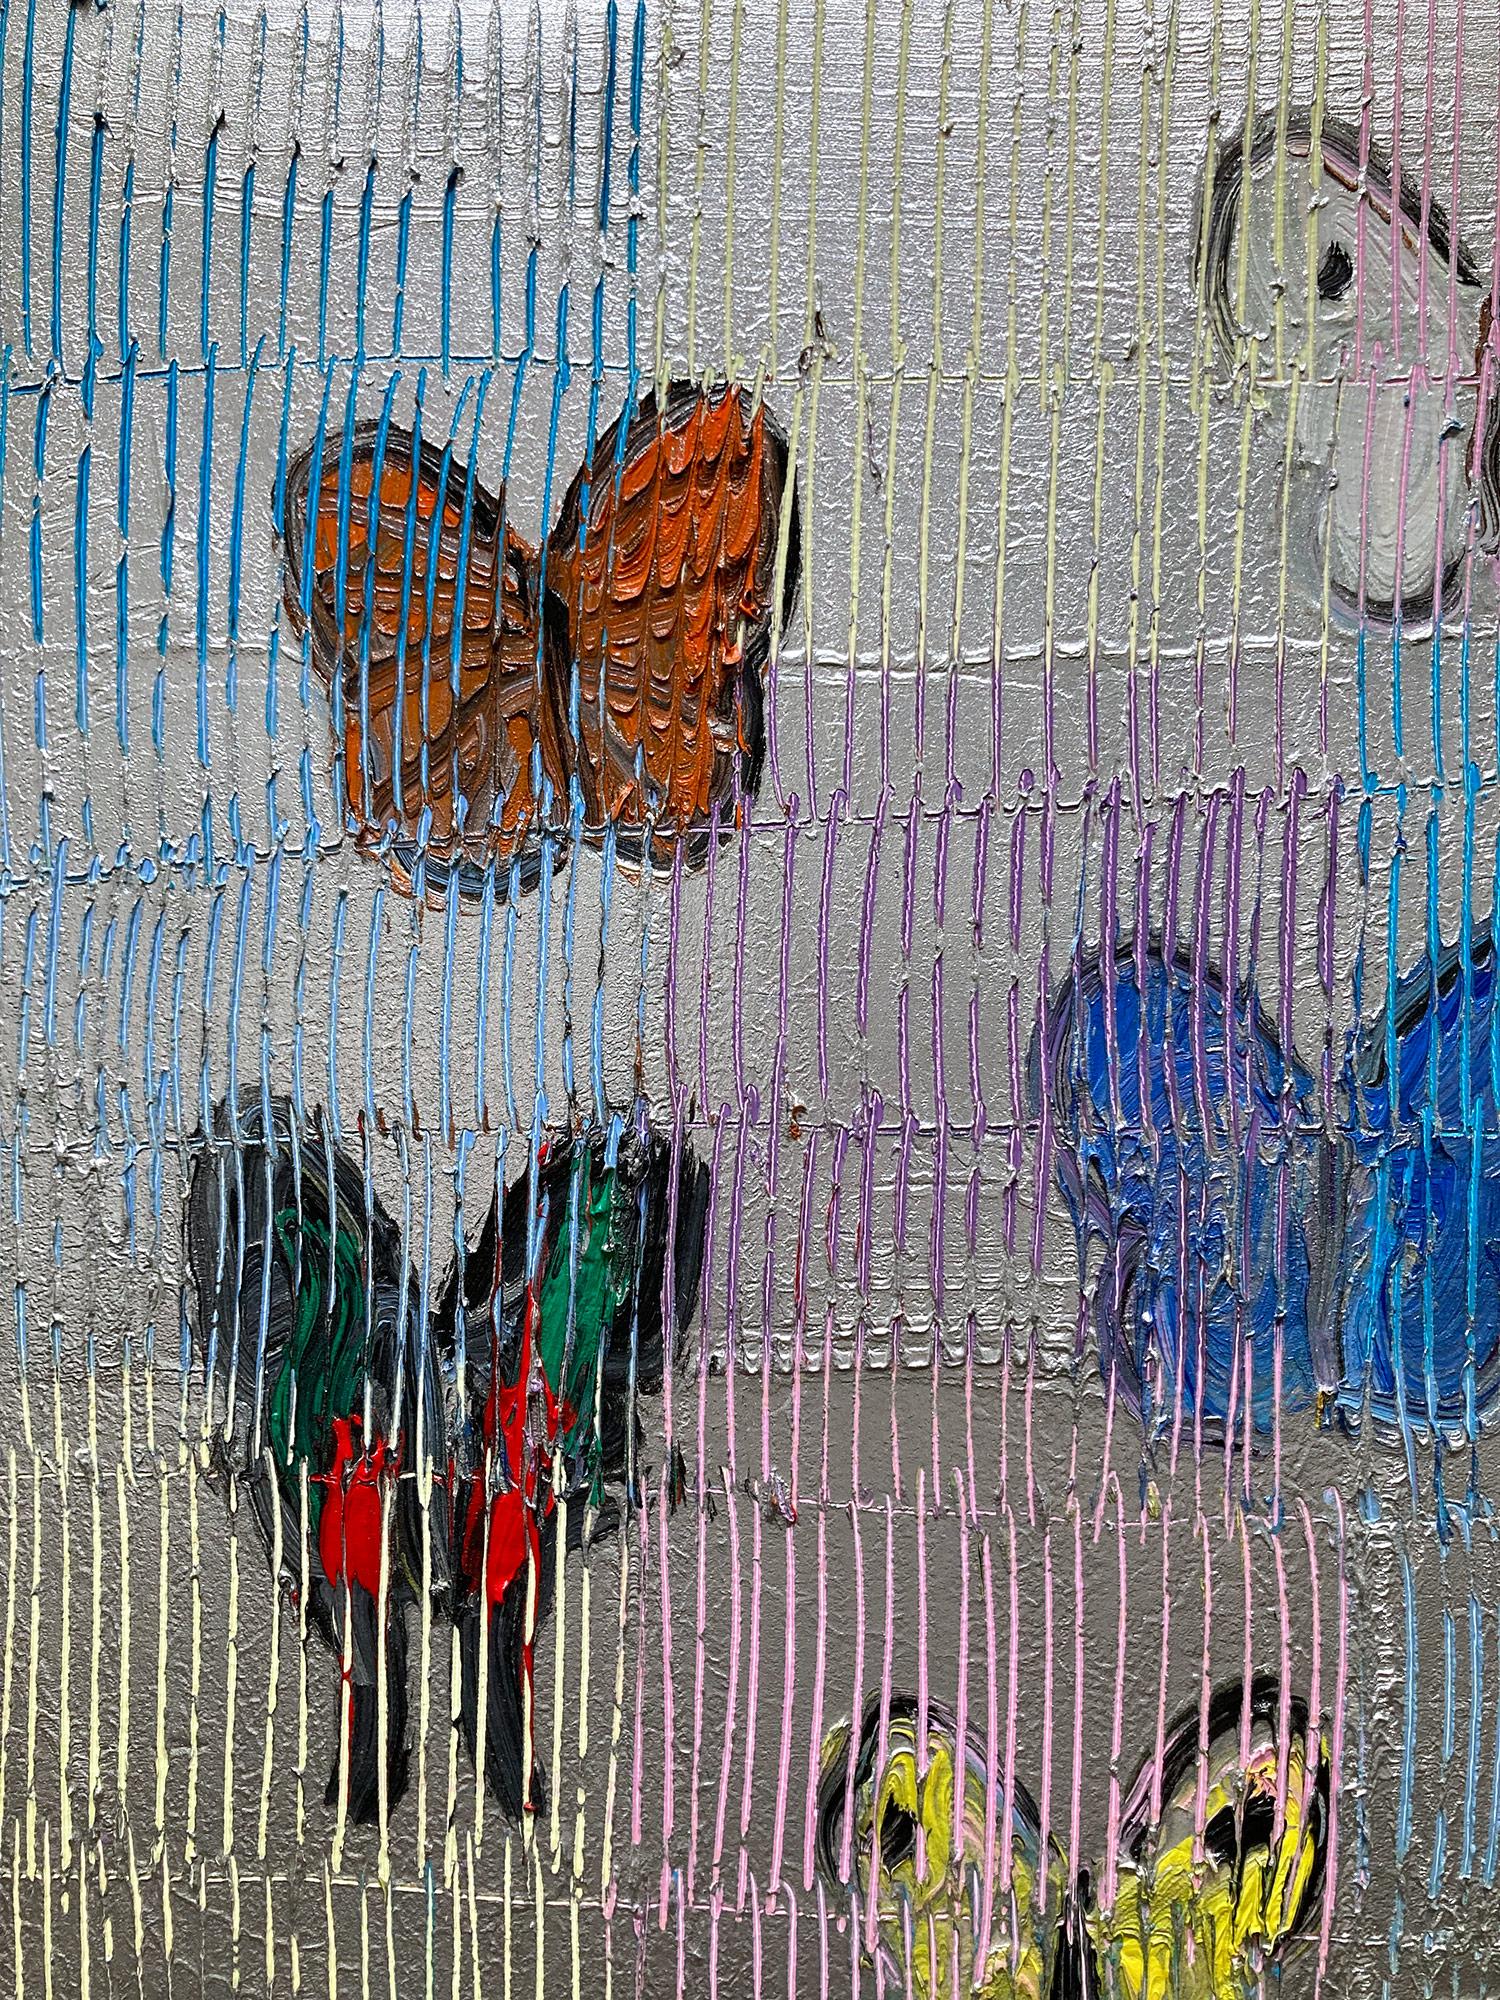 A wonderful composition of one of Slonem's most iconic subjects, Butterflies. This piece depicts delicate butterflies in ascension placed in a wonderful multicolor pastel & silver landscape. Slonem traces his famous crosshatch details throughout the